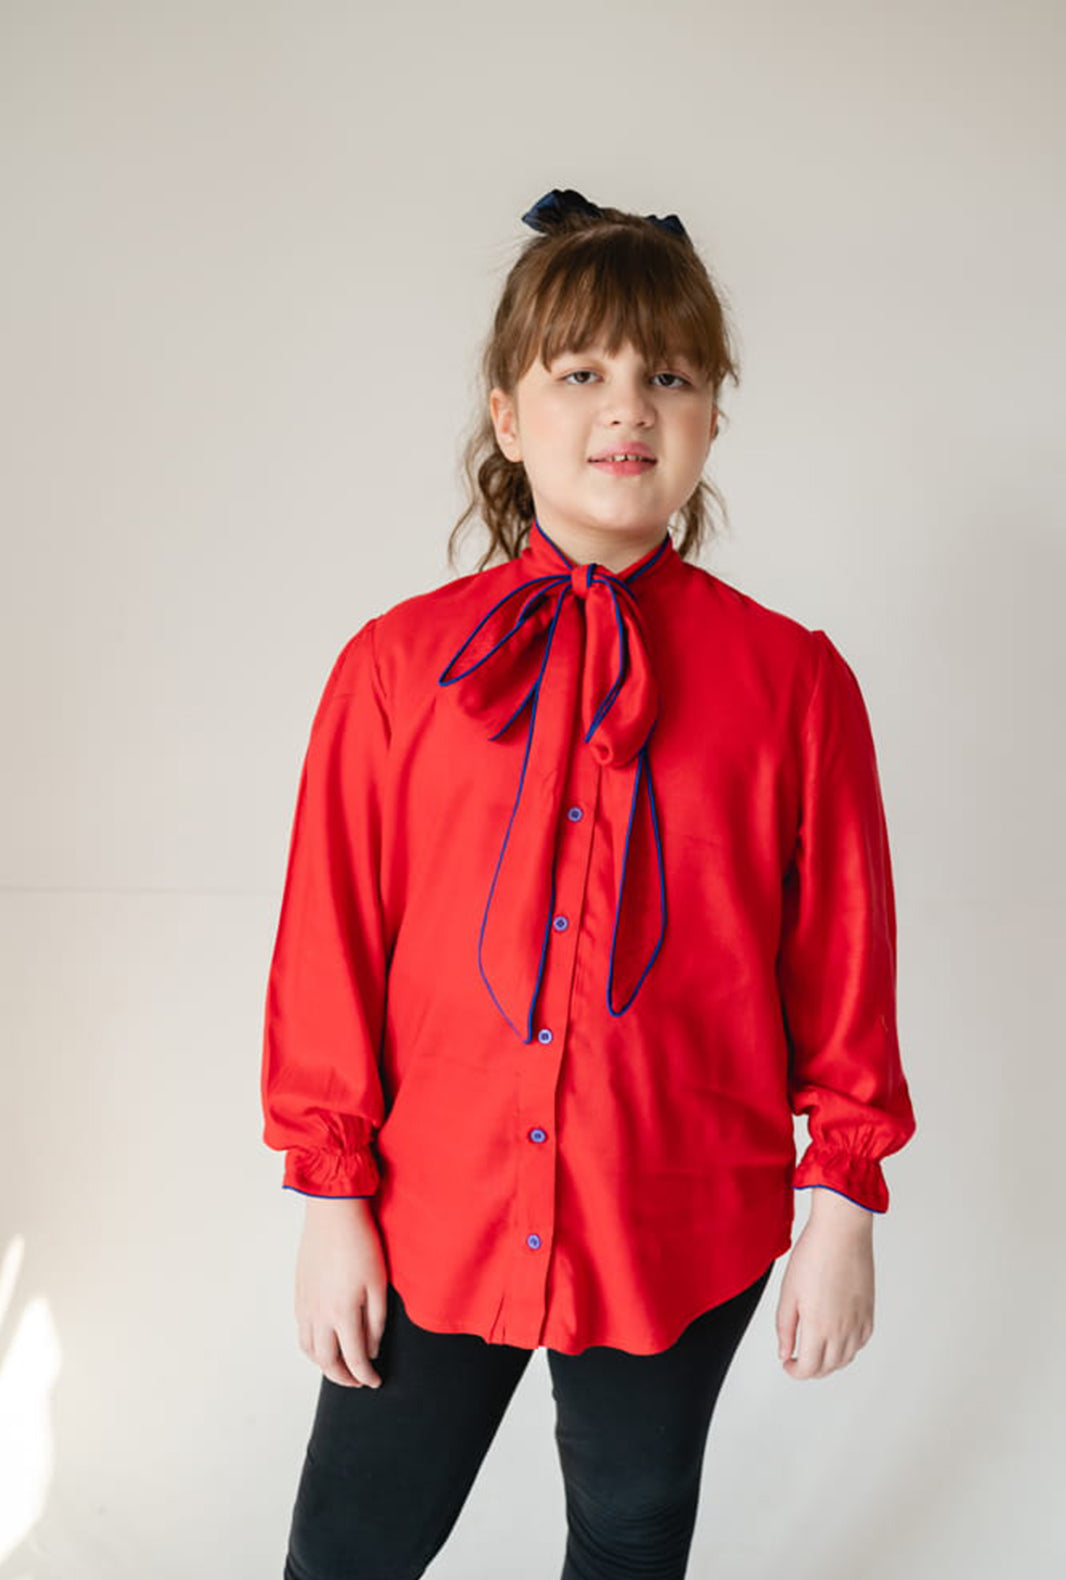 Scarlet Bow Tie Blouse